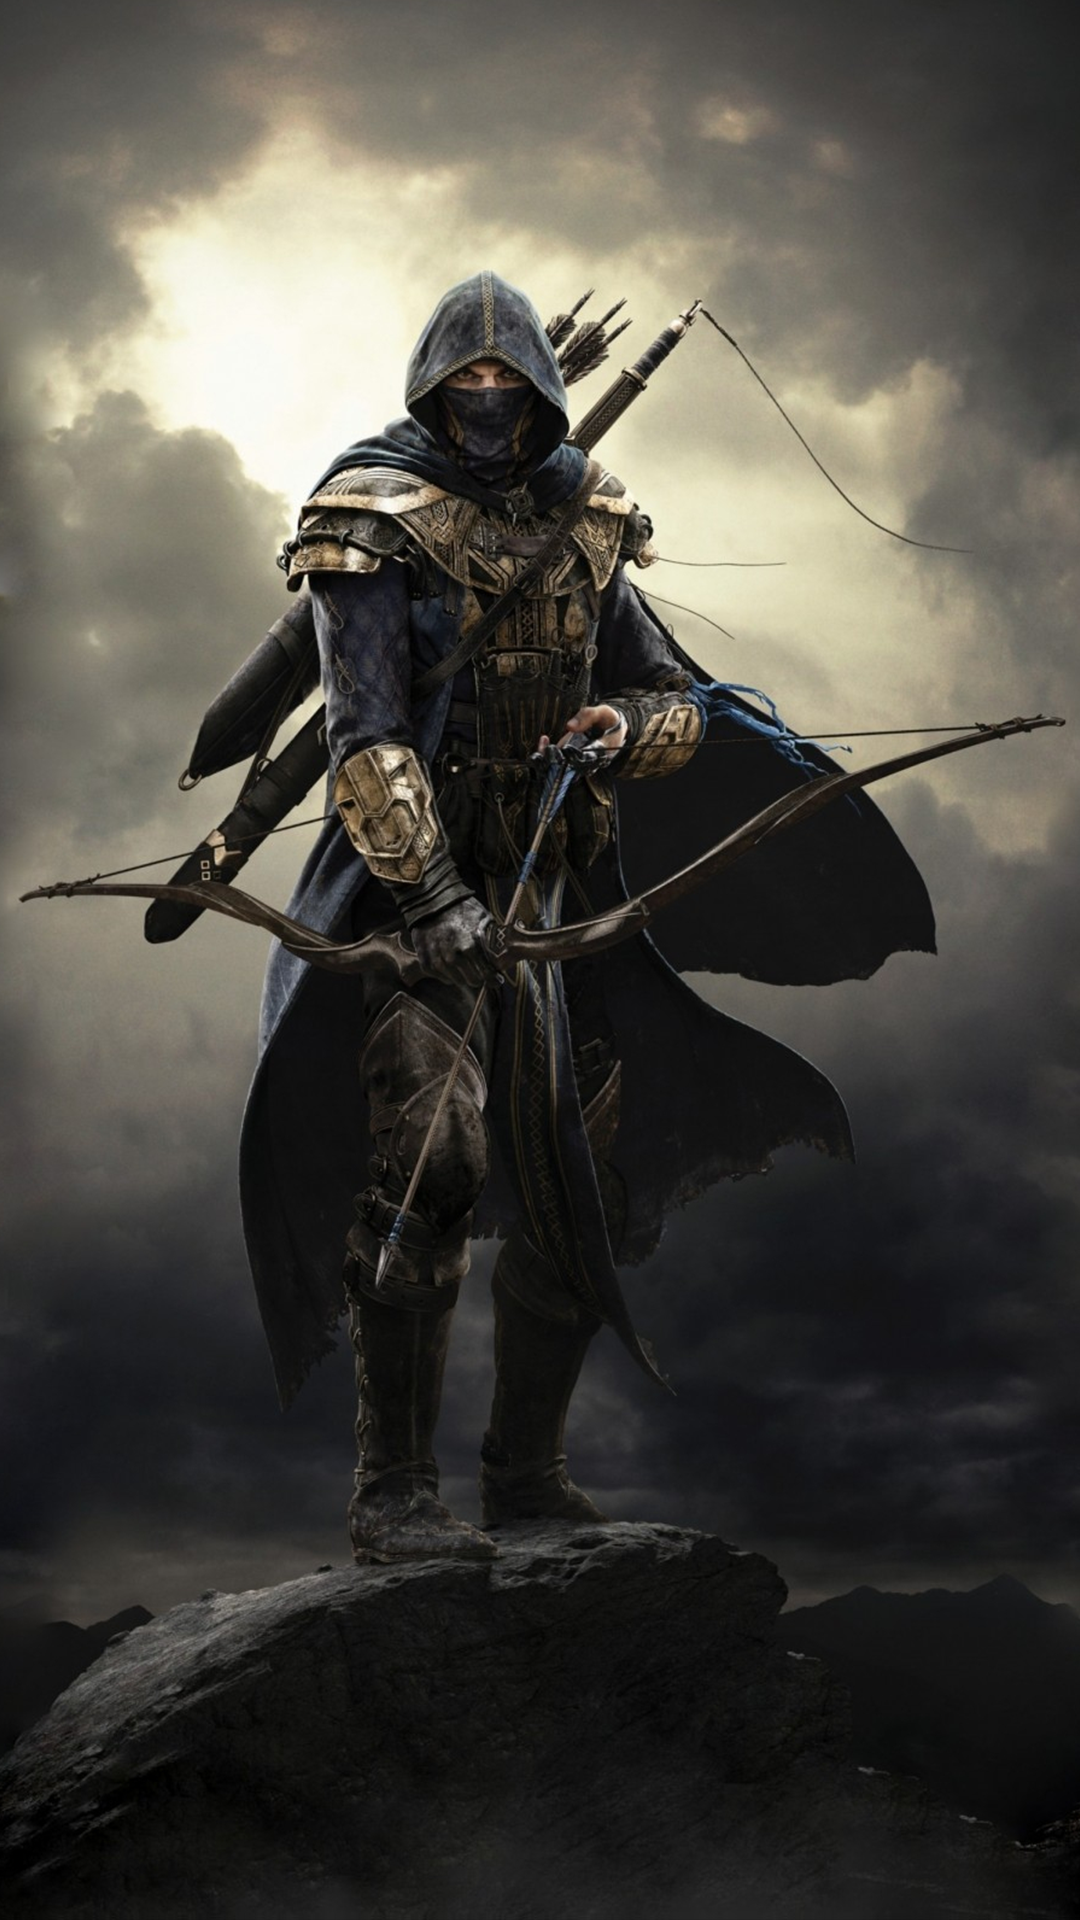 assassin's creed wallpaper for android,cg artwork,knight,action adventure game,illustration,warlord